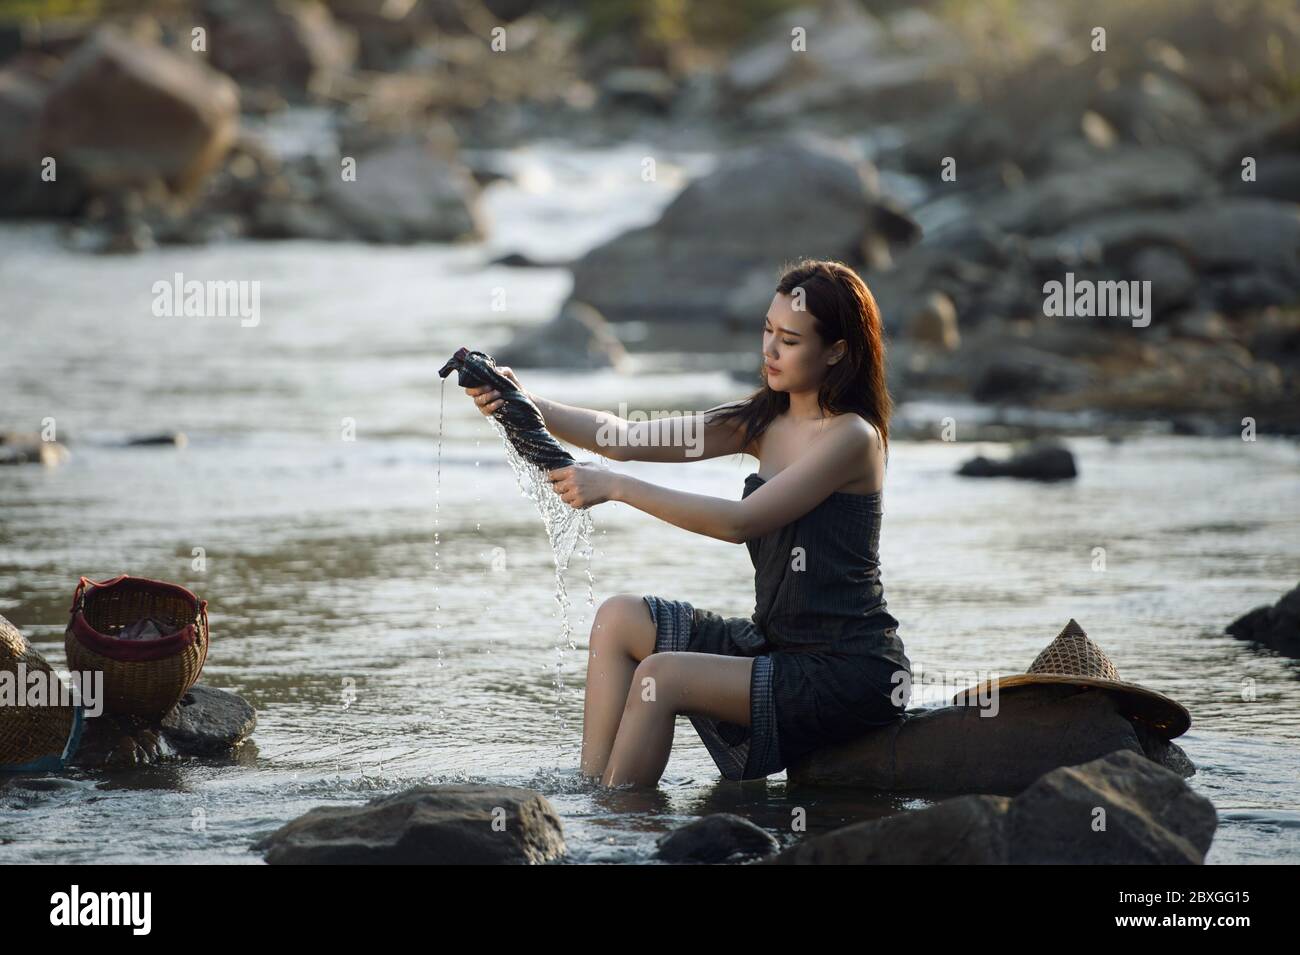 https://c8.alamy.com/comp/2BXGG15/beautiful-woman-sitting-on-a-rock-washing-her-clothes-in-the-river-thailand-2BXGG15.jpg